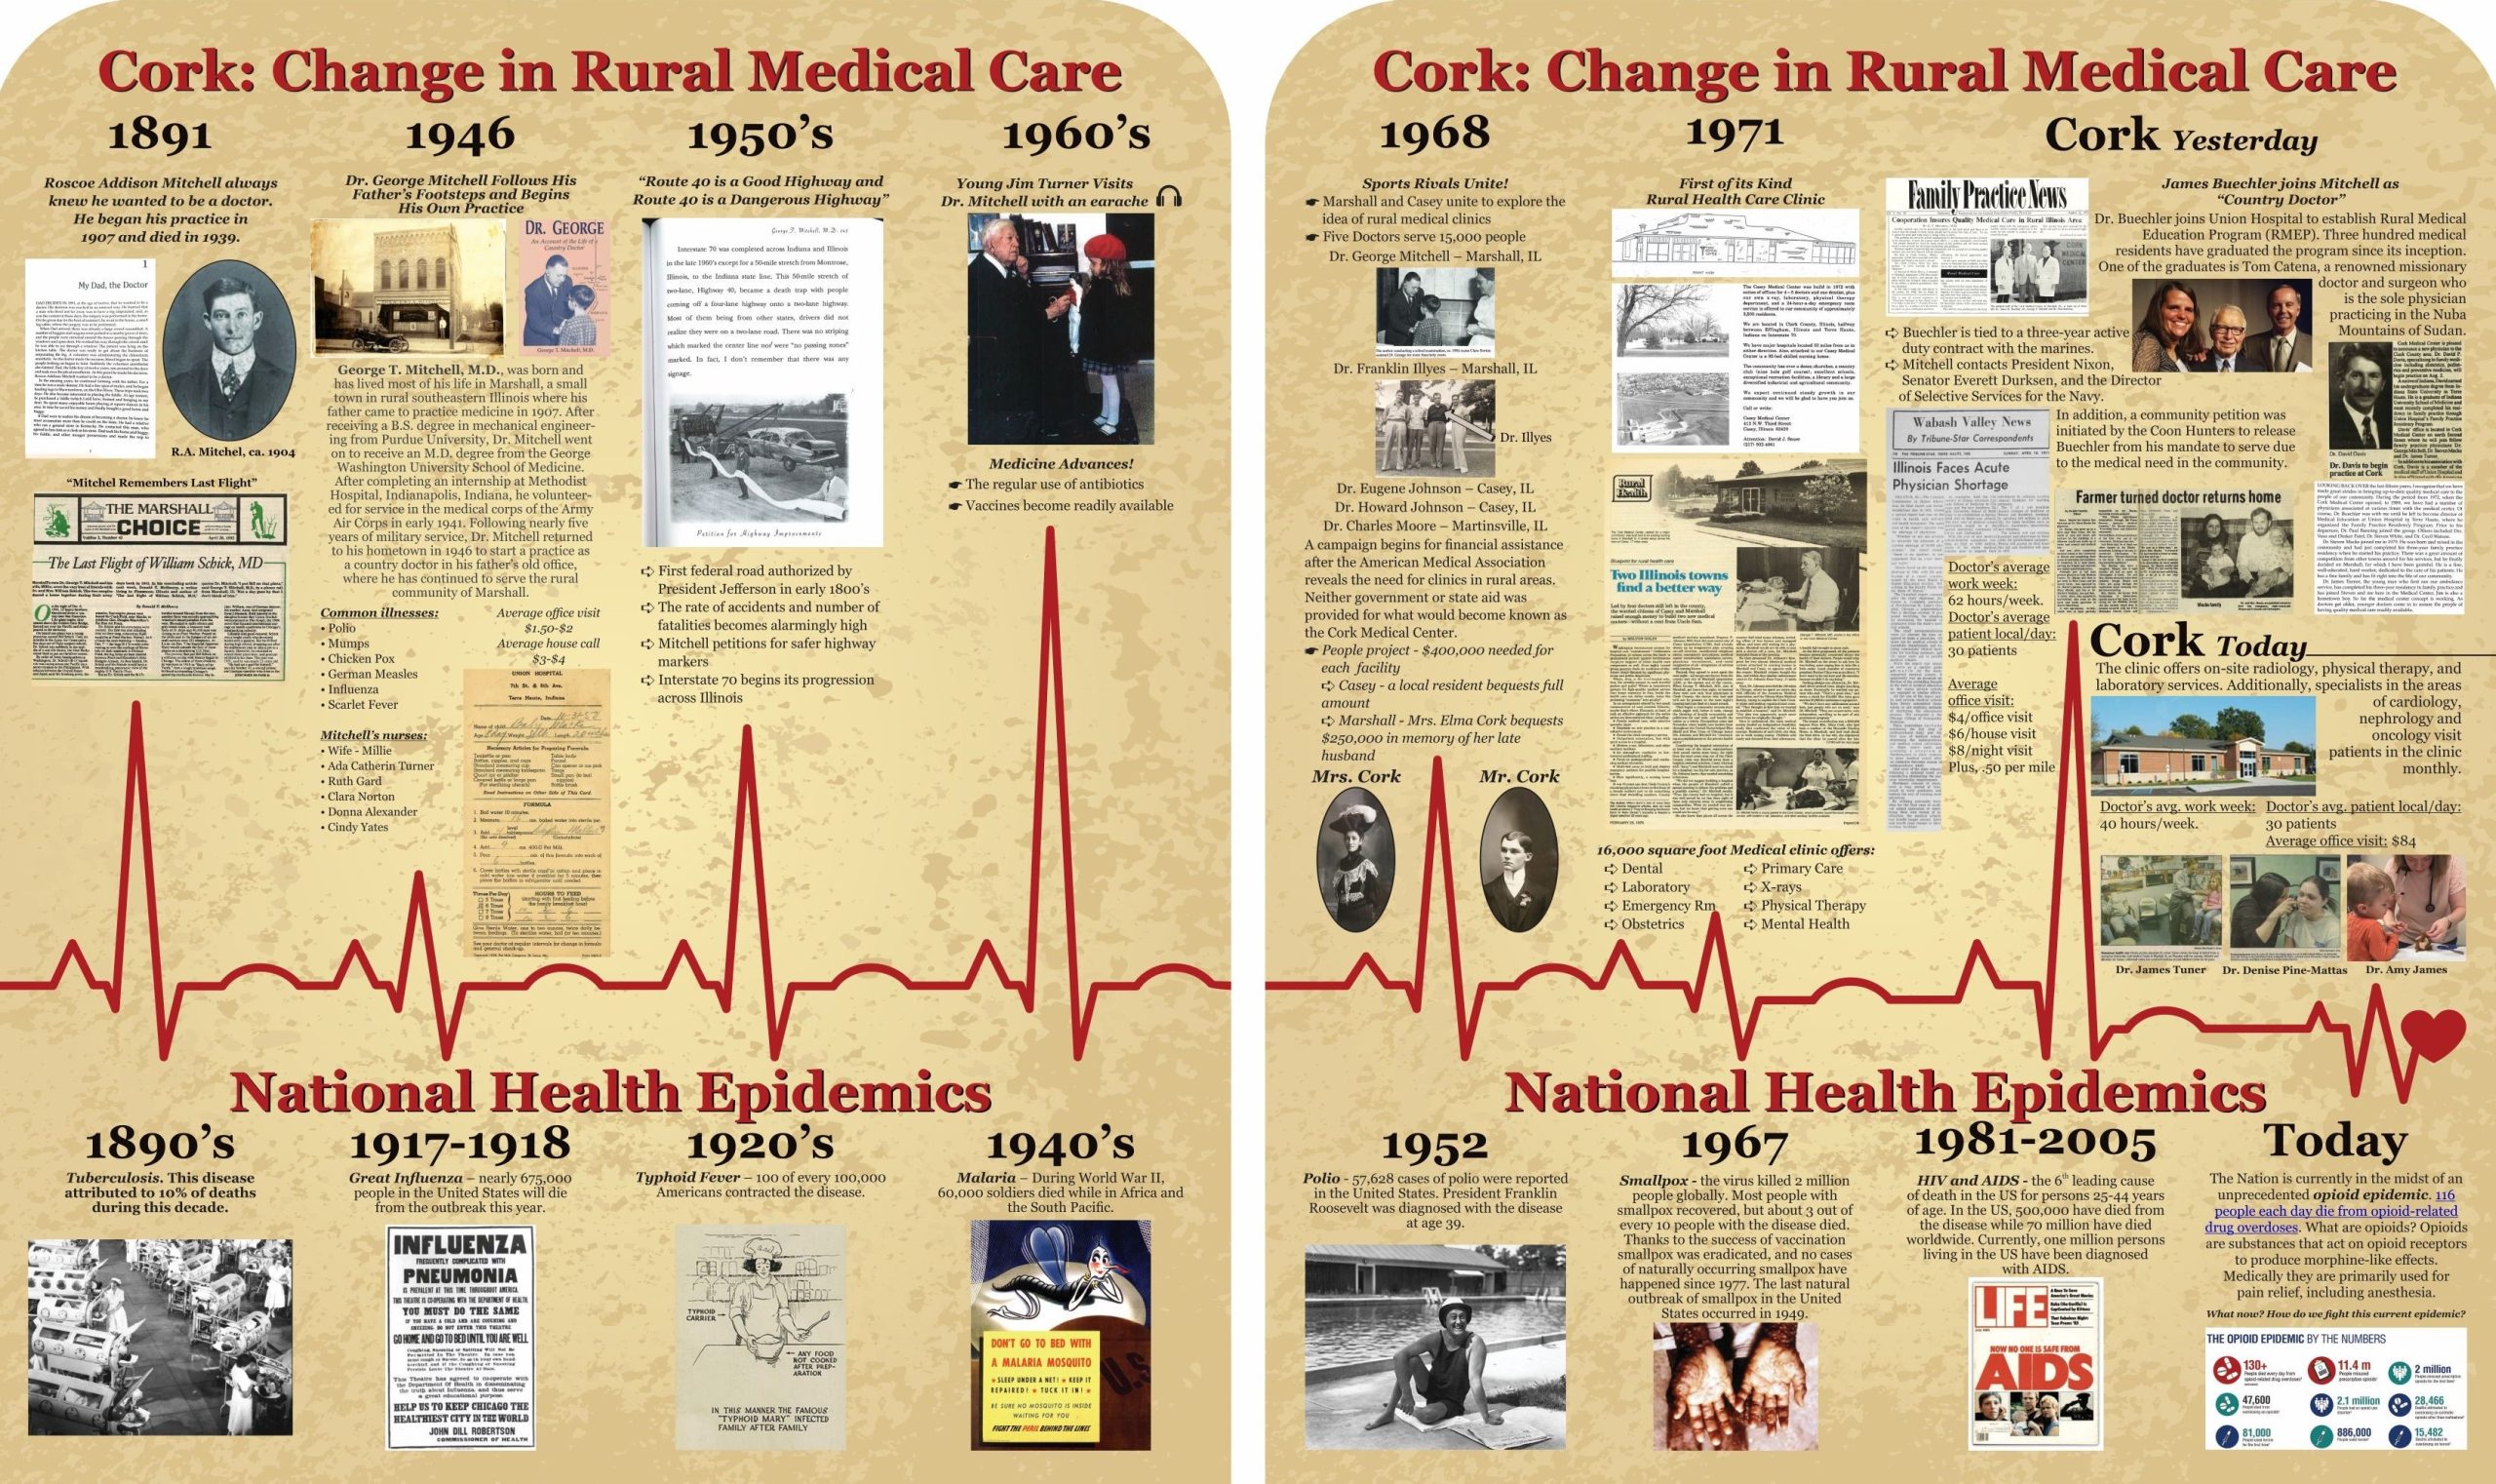 Image of a section of Marshall Public Library's companion exhibition examining history of medical care in Clark County.